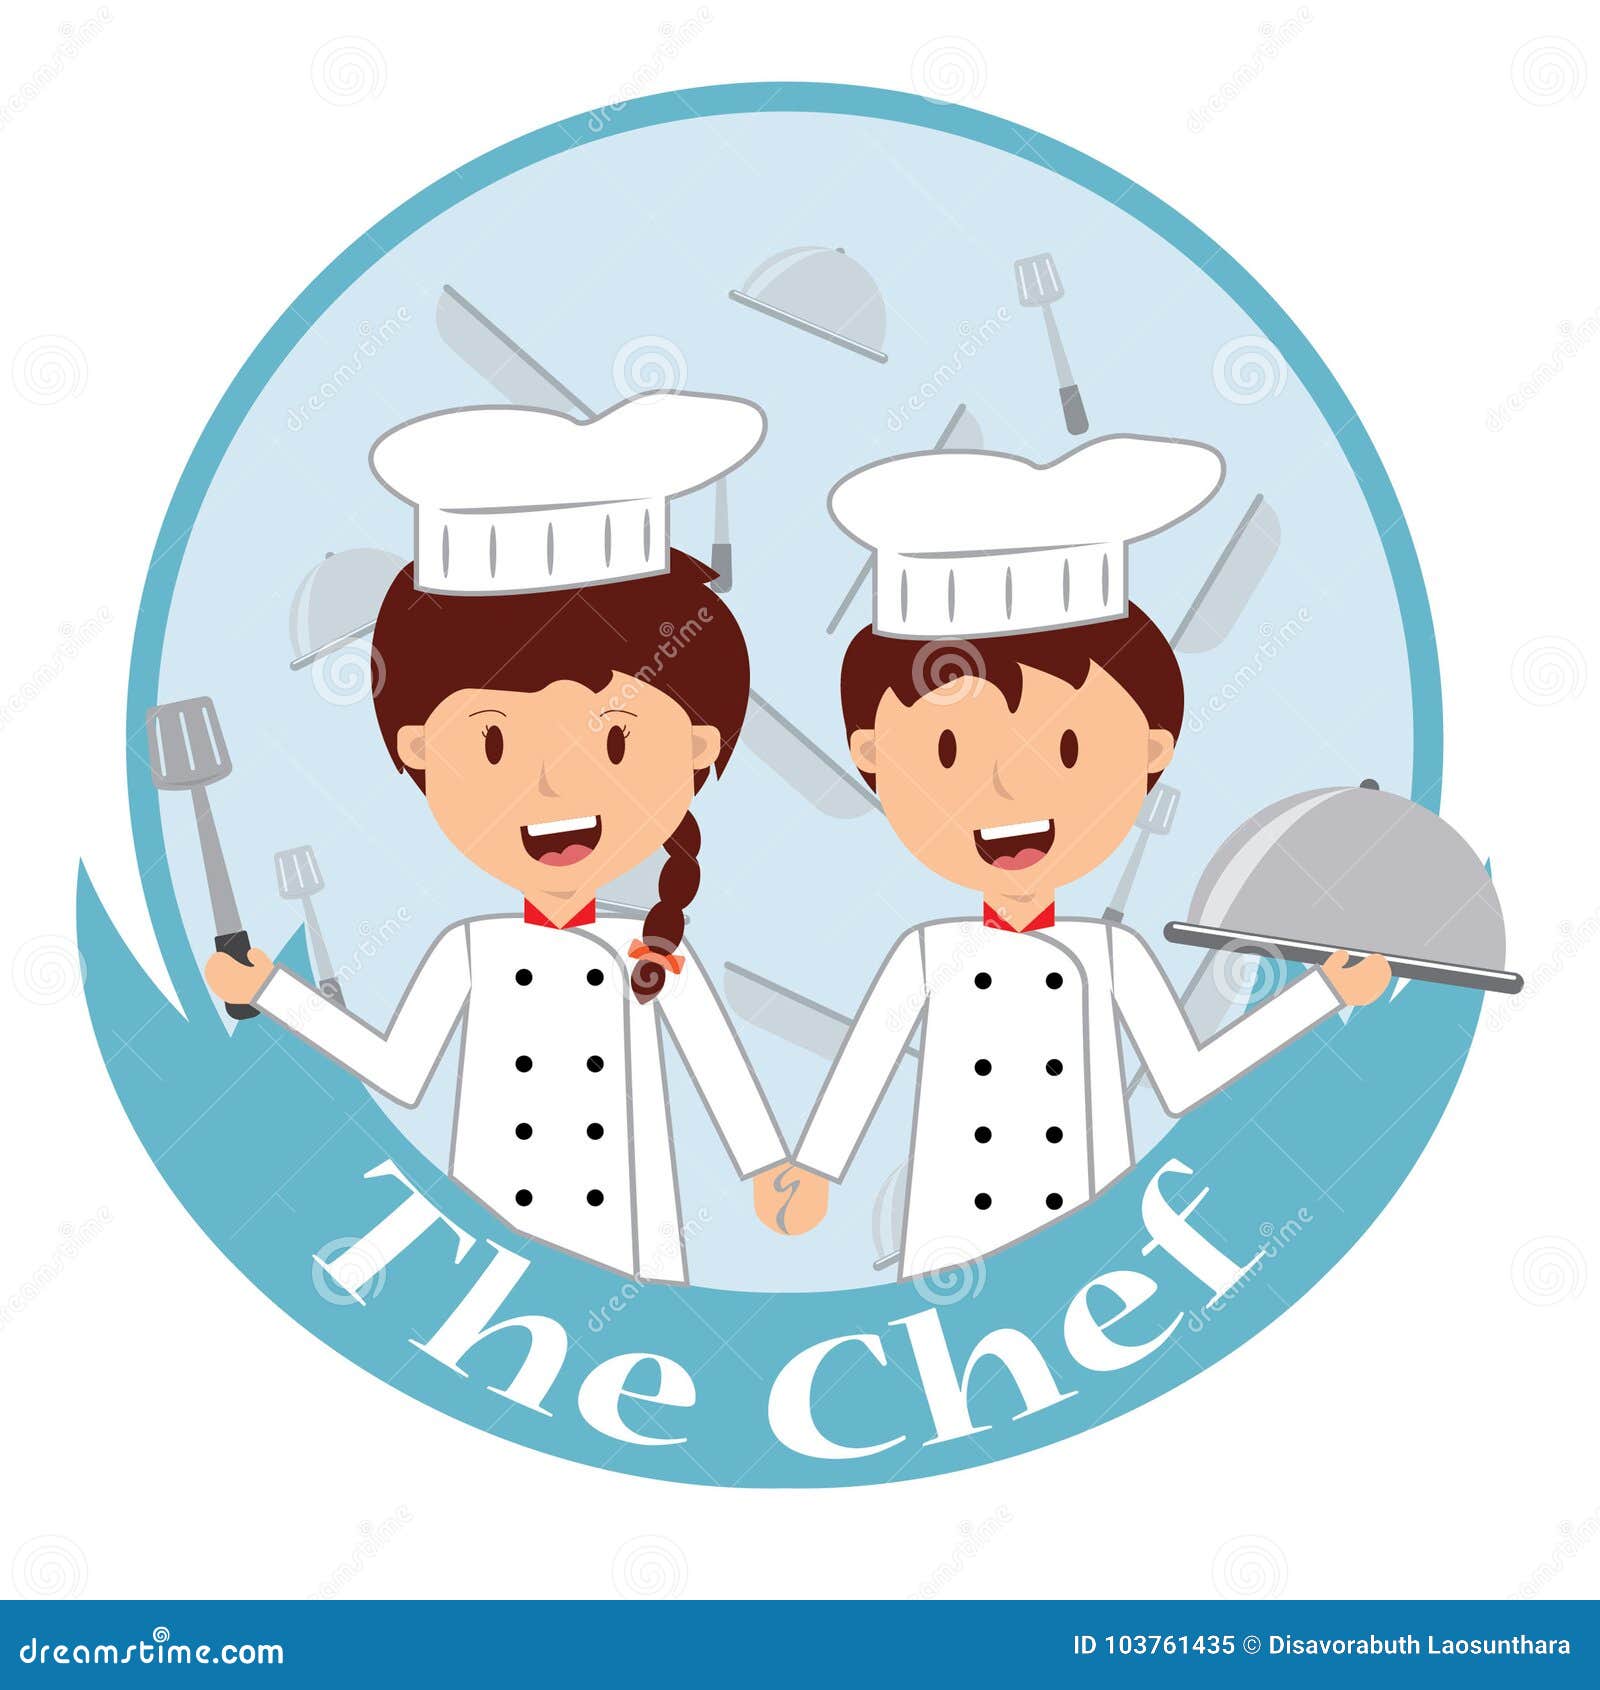 Cute Cartoon of Little Chef Cooking Stock Vector - Illustration of apron,  little: 103761435